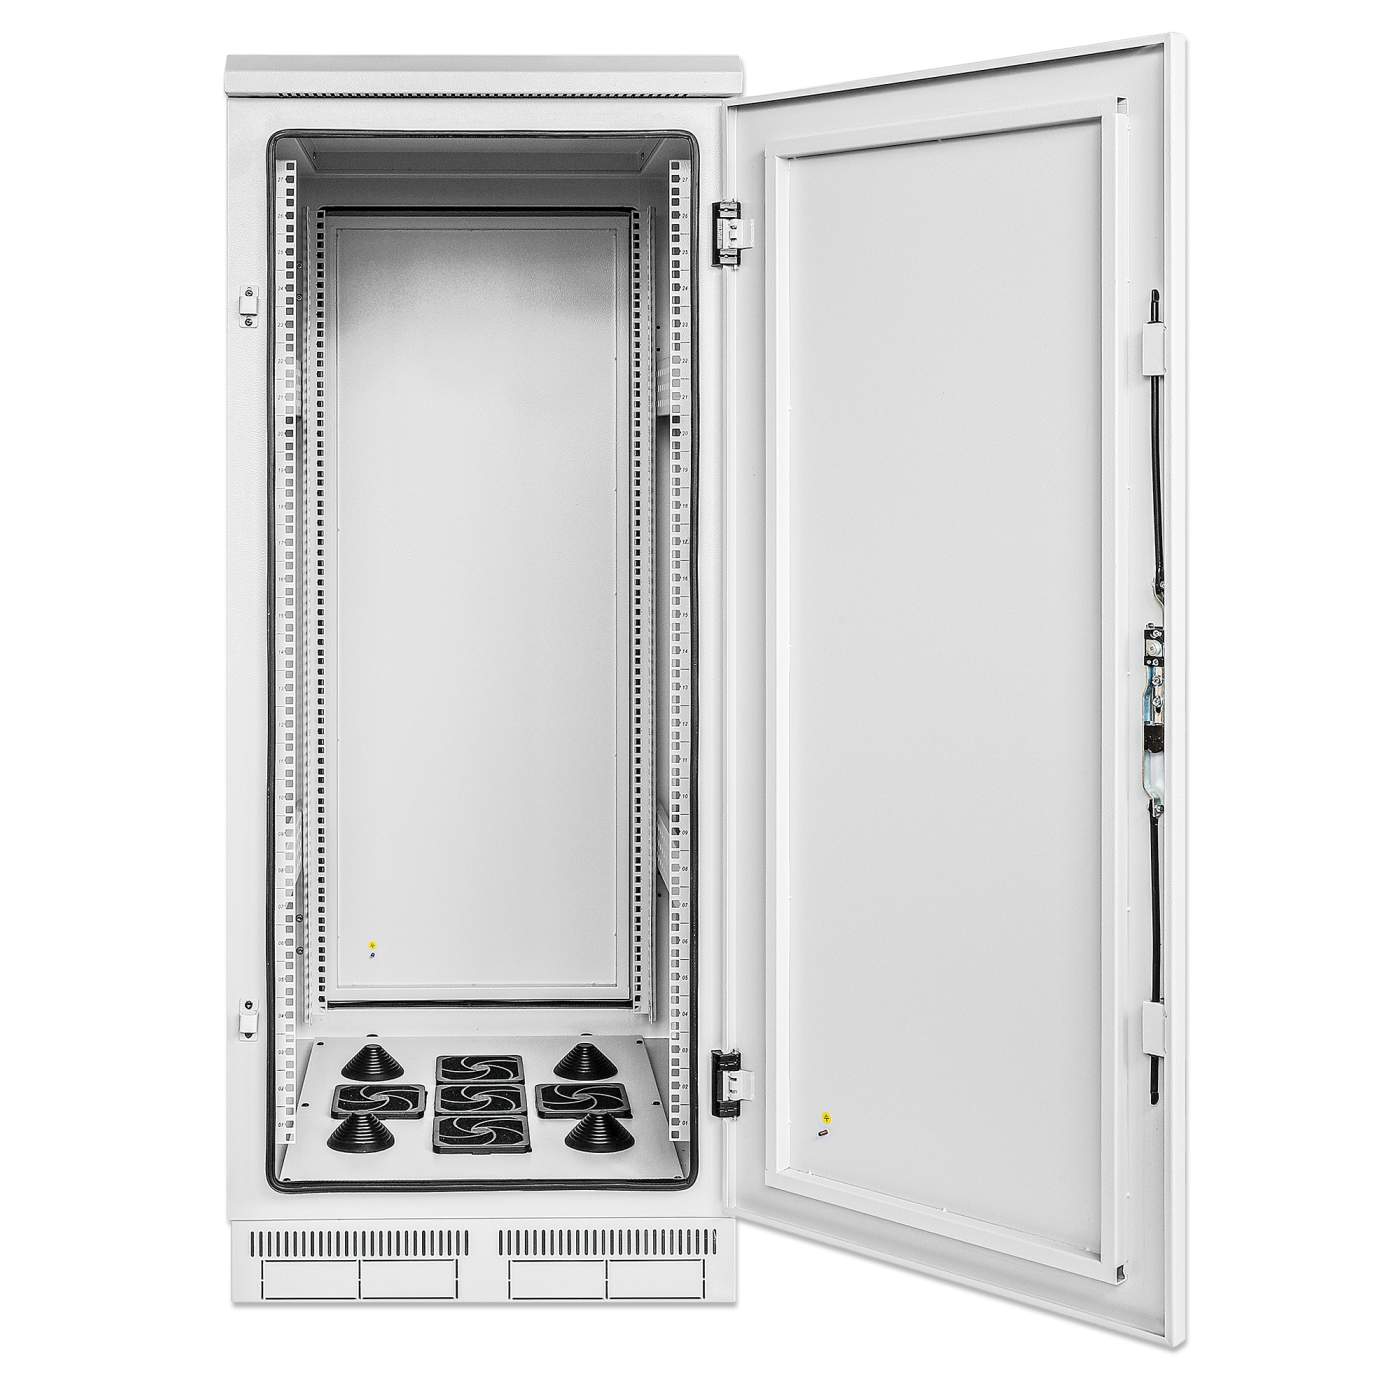 Industrial IP55 19" Network Cabinet with Integrated Fans, 27U Image 4